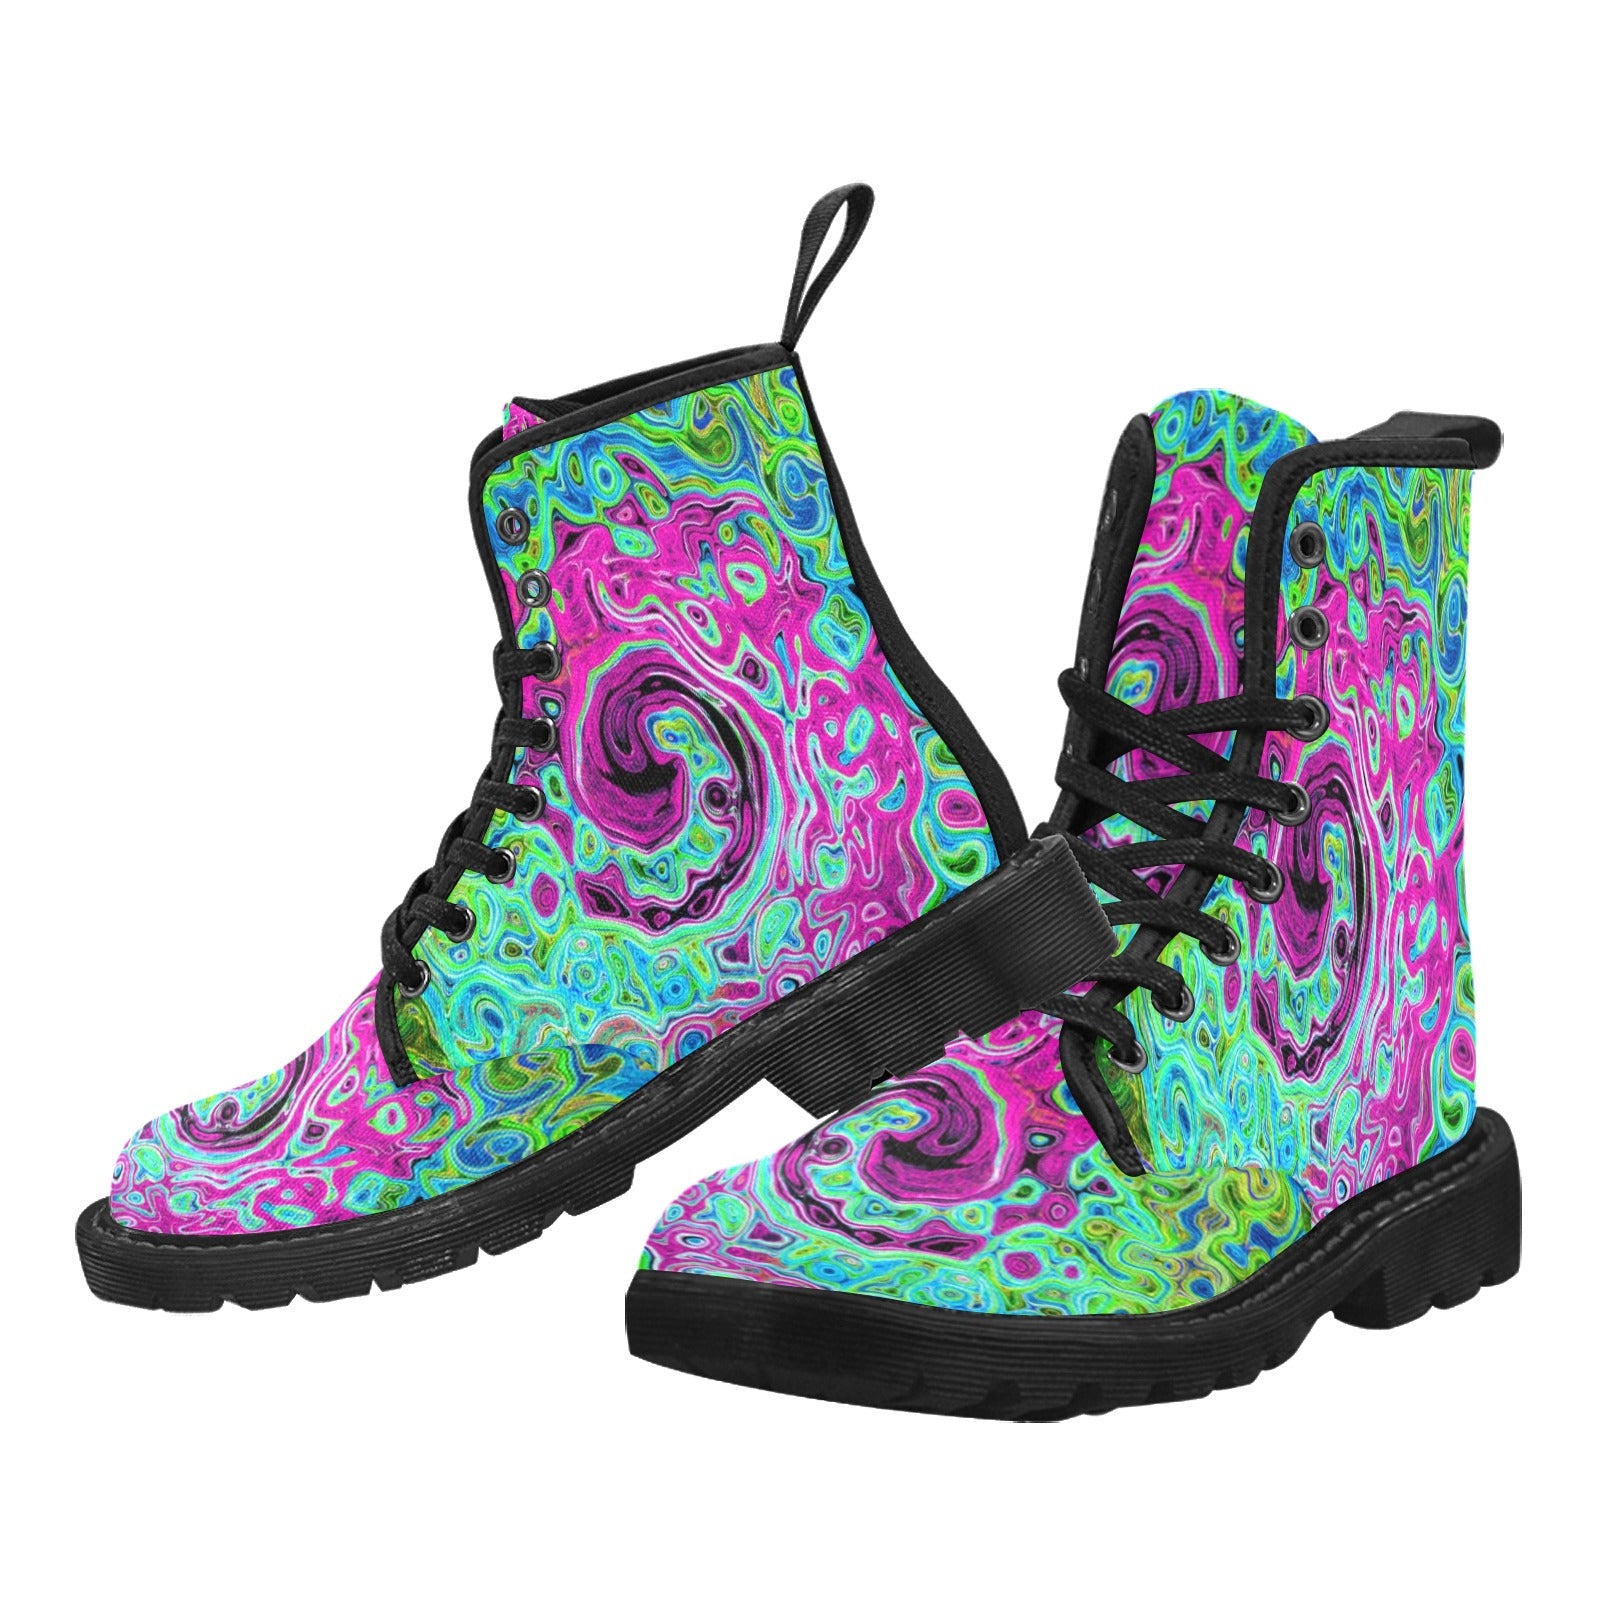 Boots for Women, Hot Pink and Blue Groovy Abstract Retro Liquid Swirl - Black